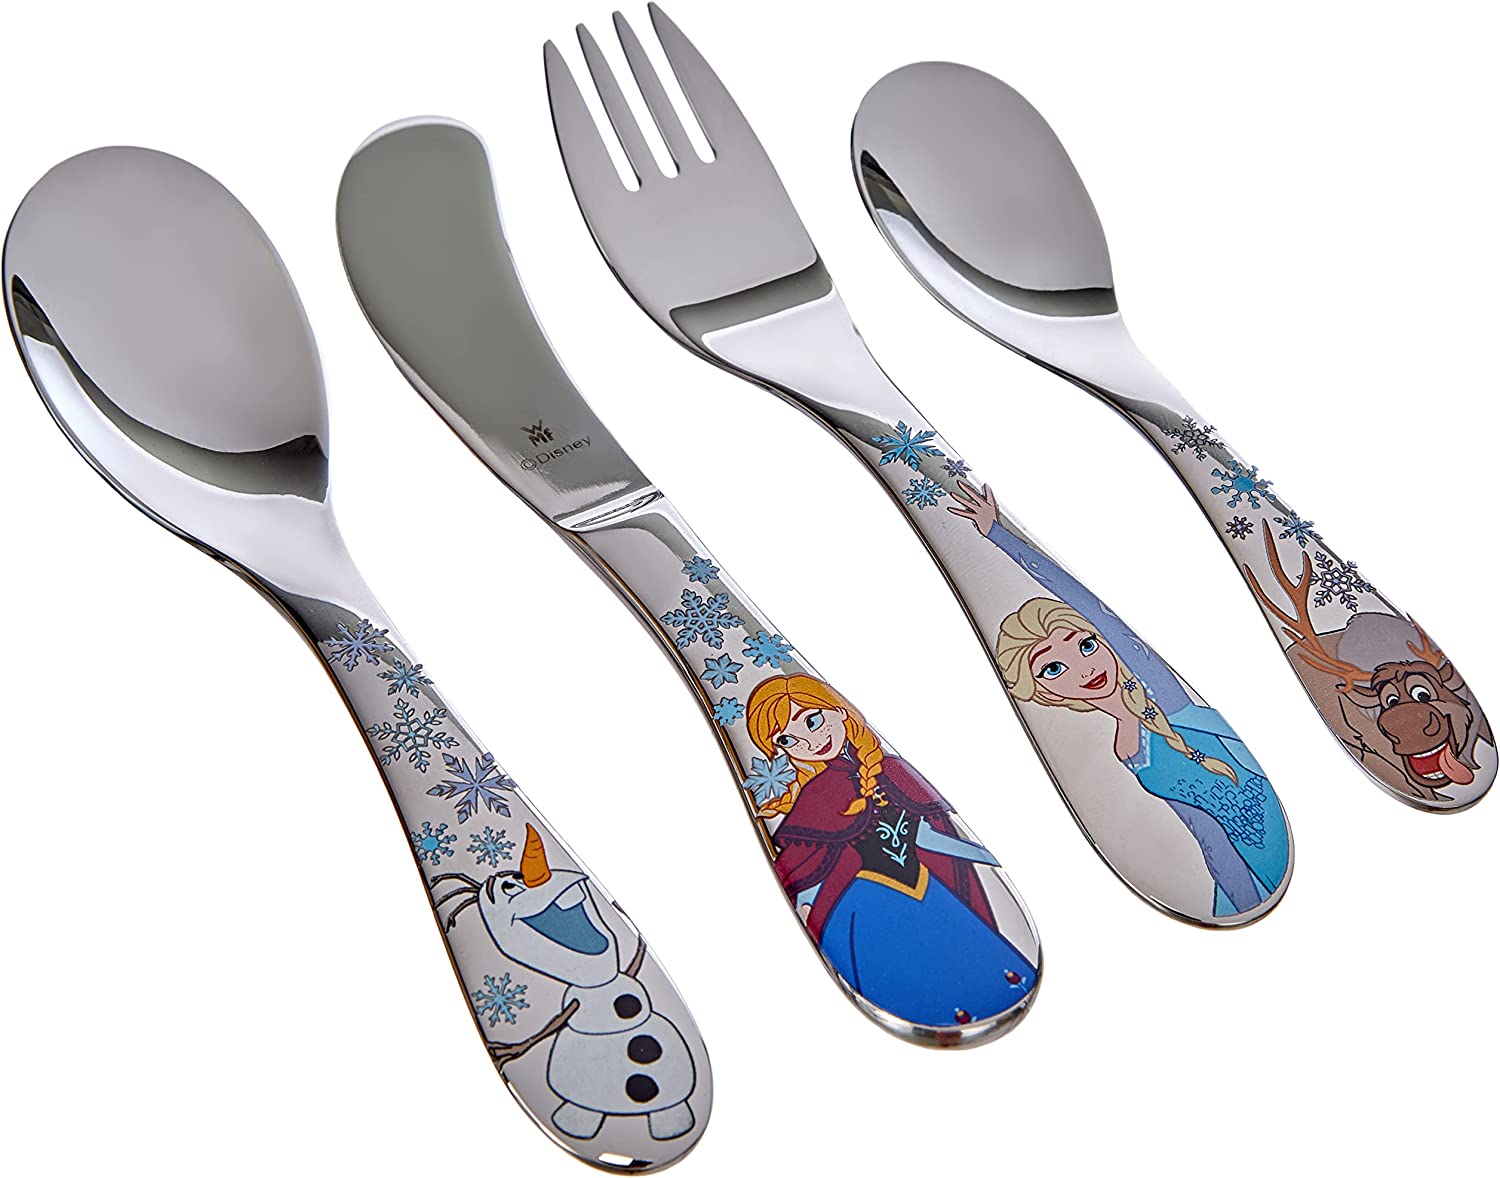 WMF Disney Frozen Children\'s Cutlery Set 4 Pieces from 3 Years Stainless Steel Cromargan Polished Dishwasher-Safe Colourfast Food-Safe, 22 x 16 x 3 cm